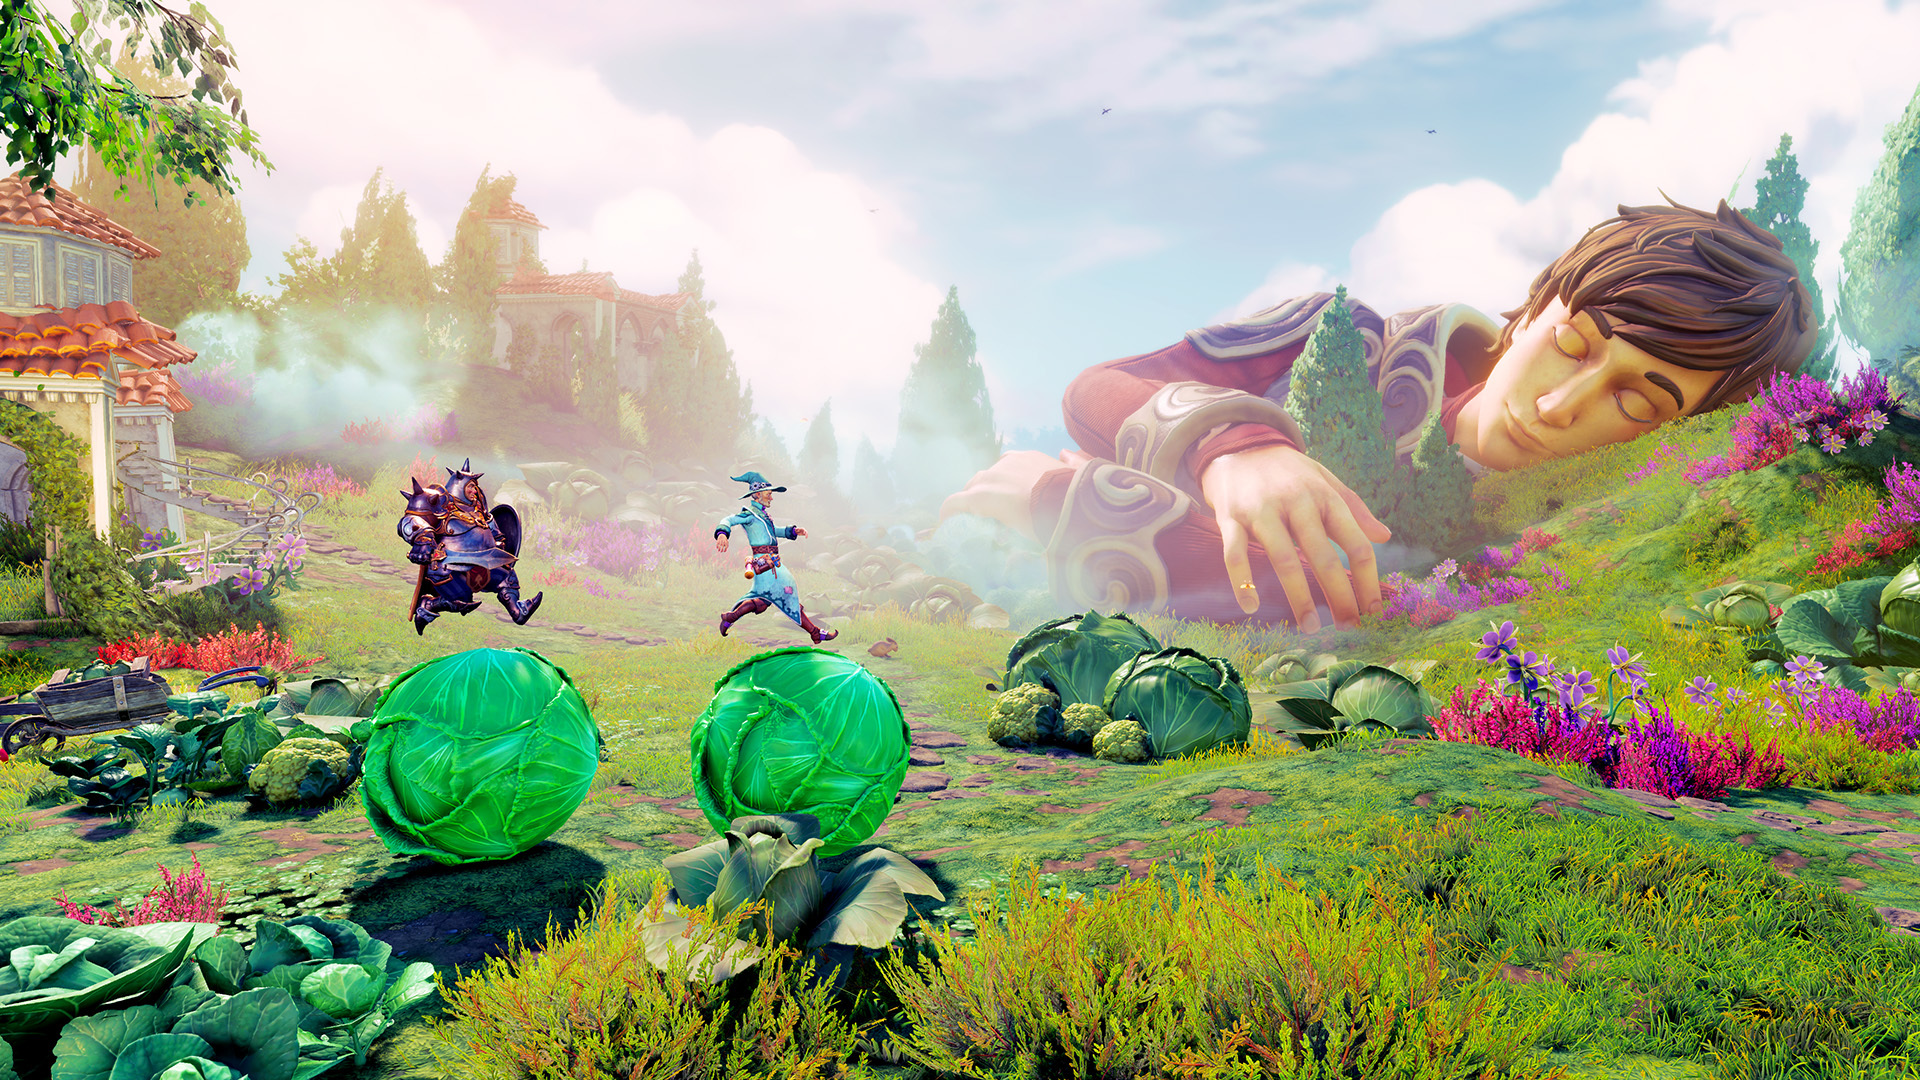  Trine 4 is off to dreamland in the Melody of Mystery DLC 